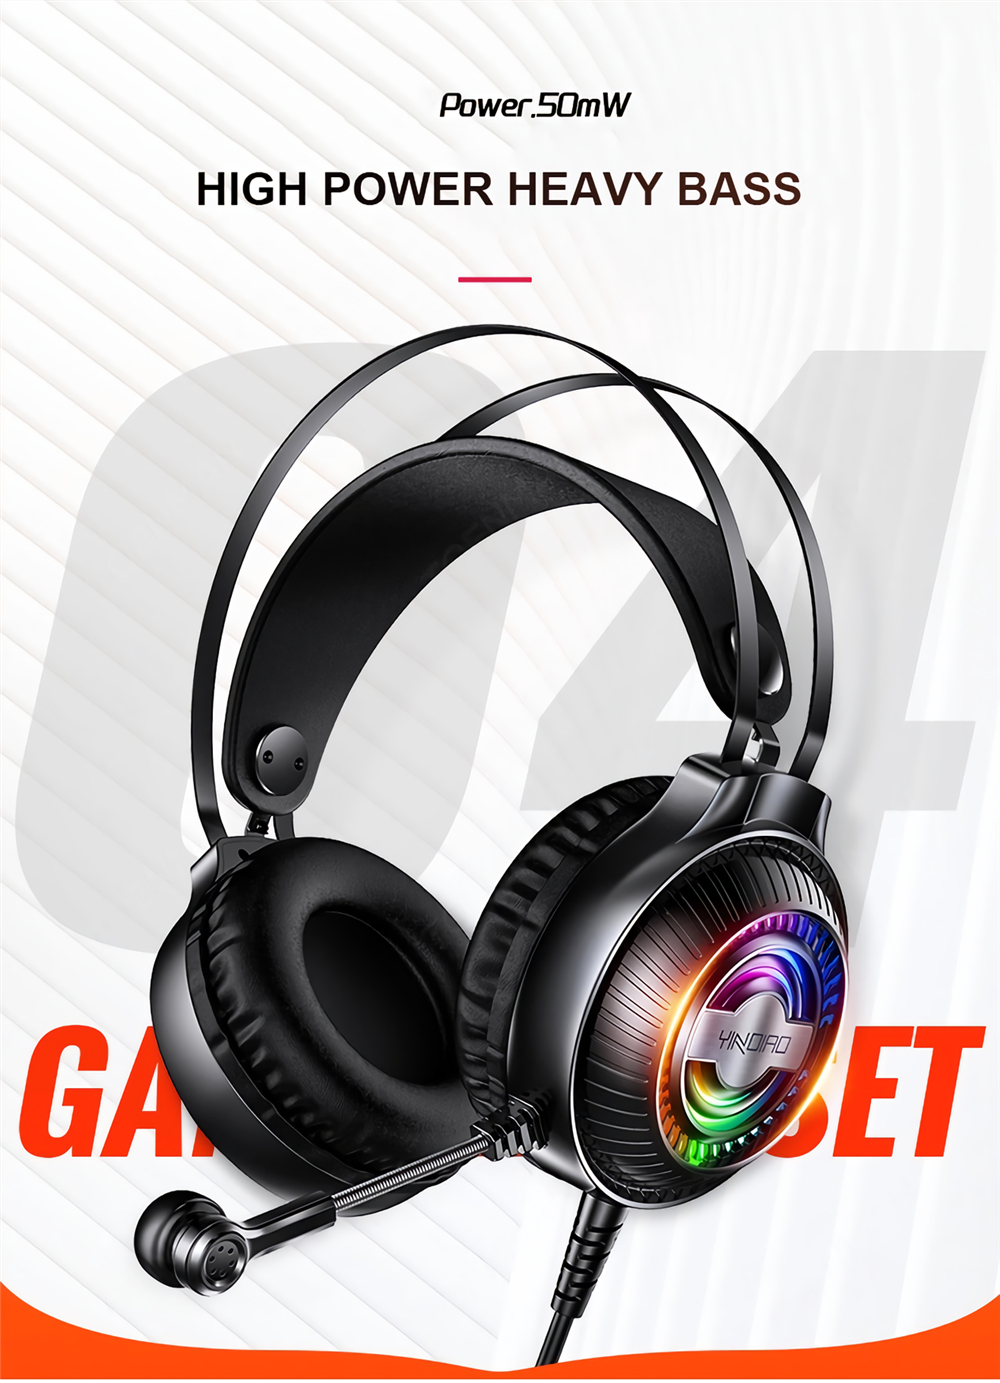 YINDIAO-Q4-Game-Headphone-35mm-Wired-Bass-RGB-Gaming-Headset-Stereo-Sound-Headset-with-Mic-for-Compu-1802147-10